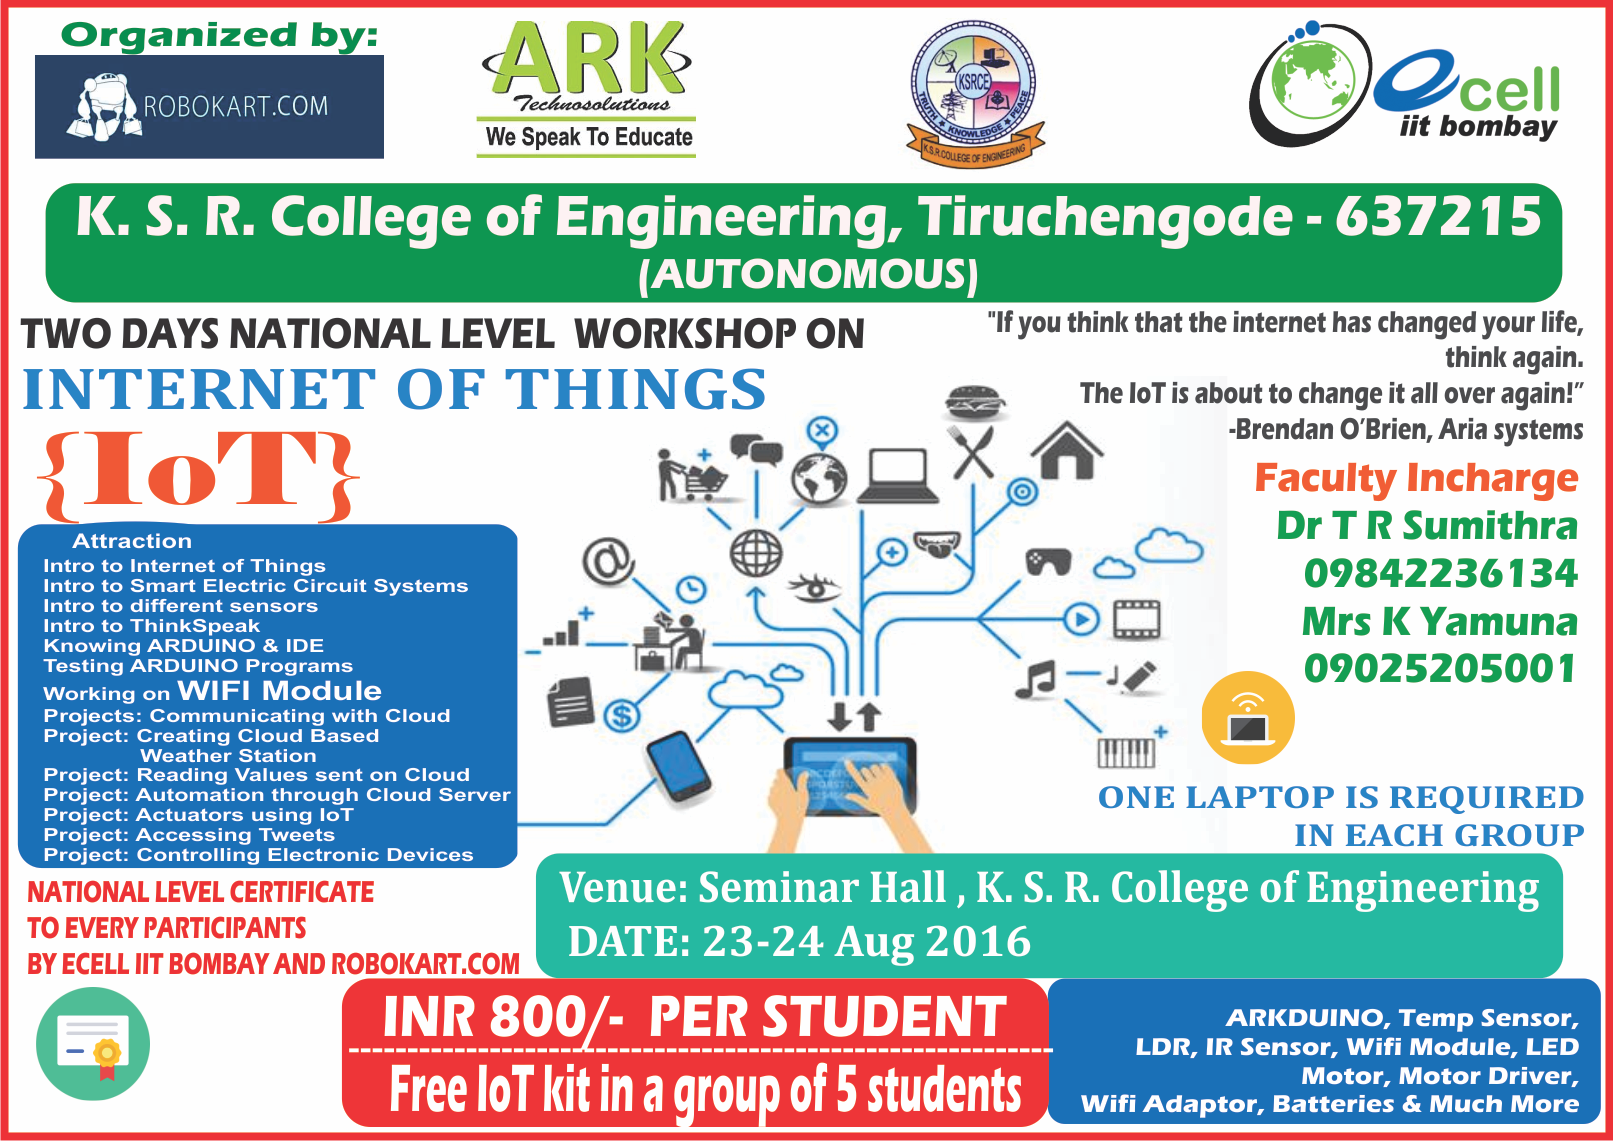 Two days National level Workshop on "Internet of Things" in association with E-cell IIT Bombay- Robokart, Namakkal, Tamil Nadu, India